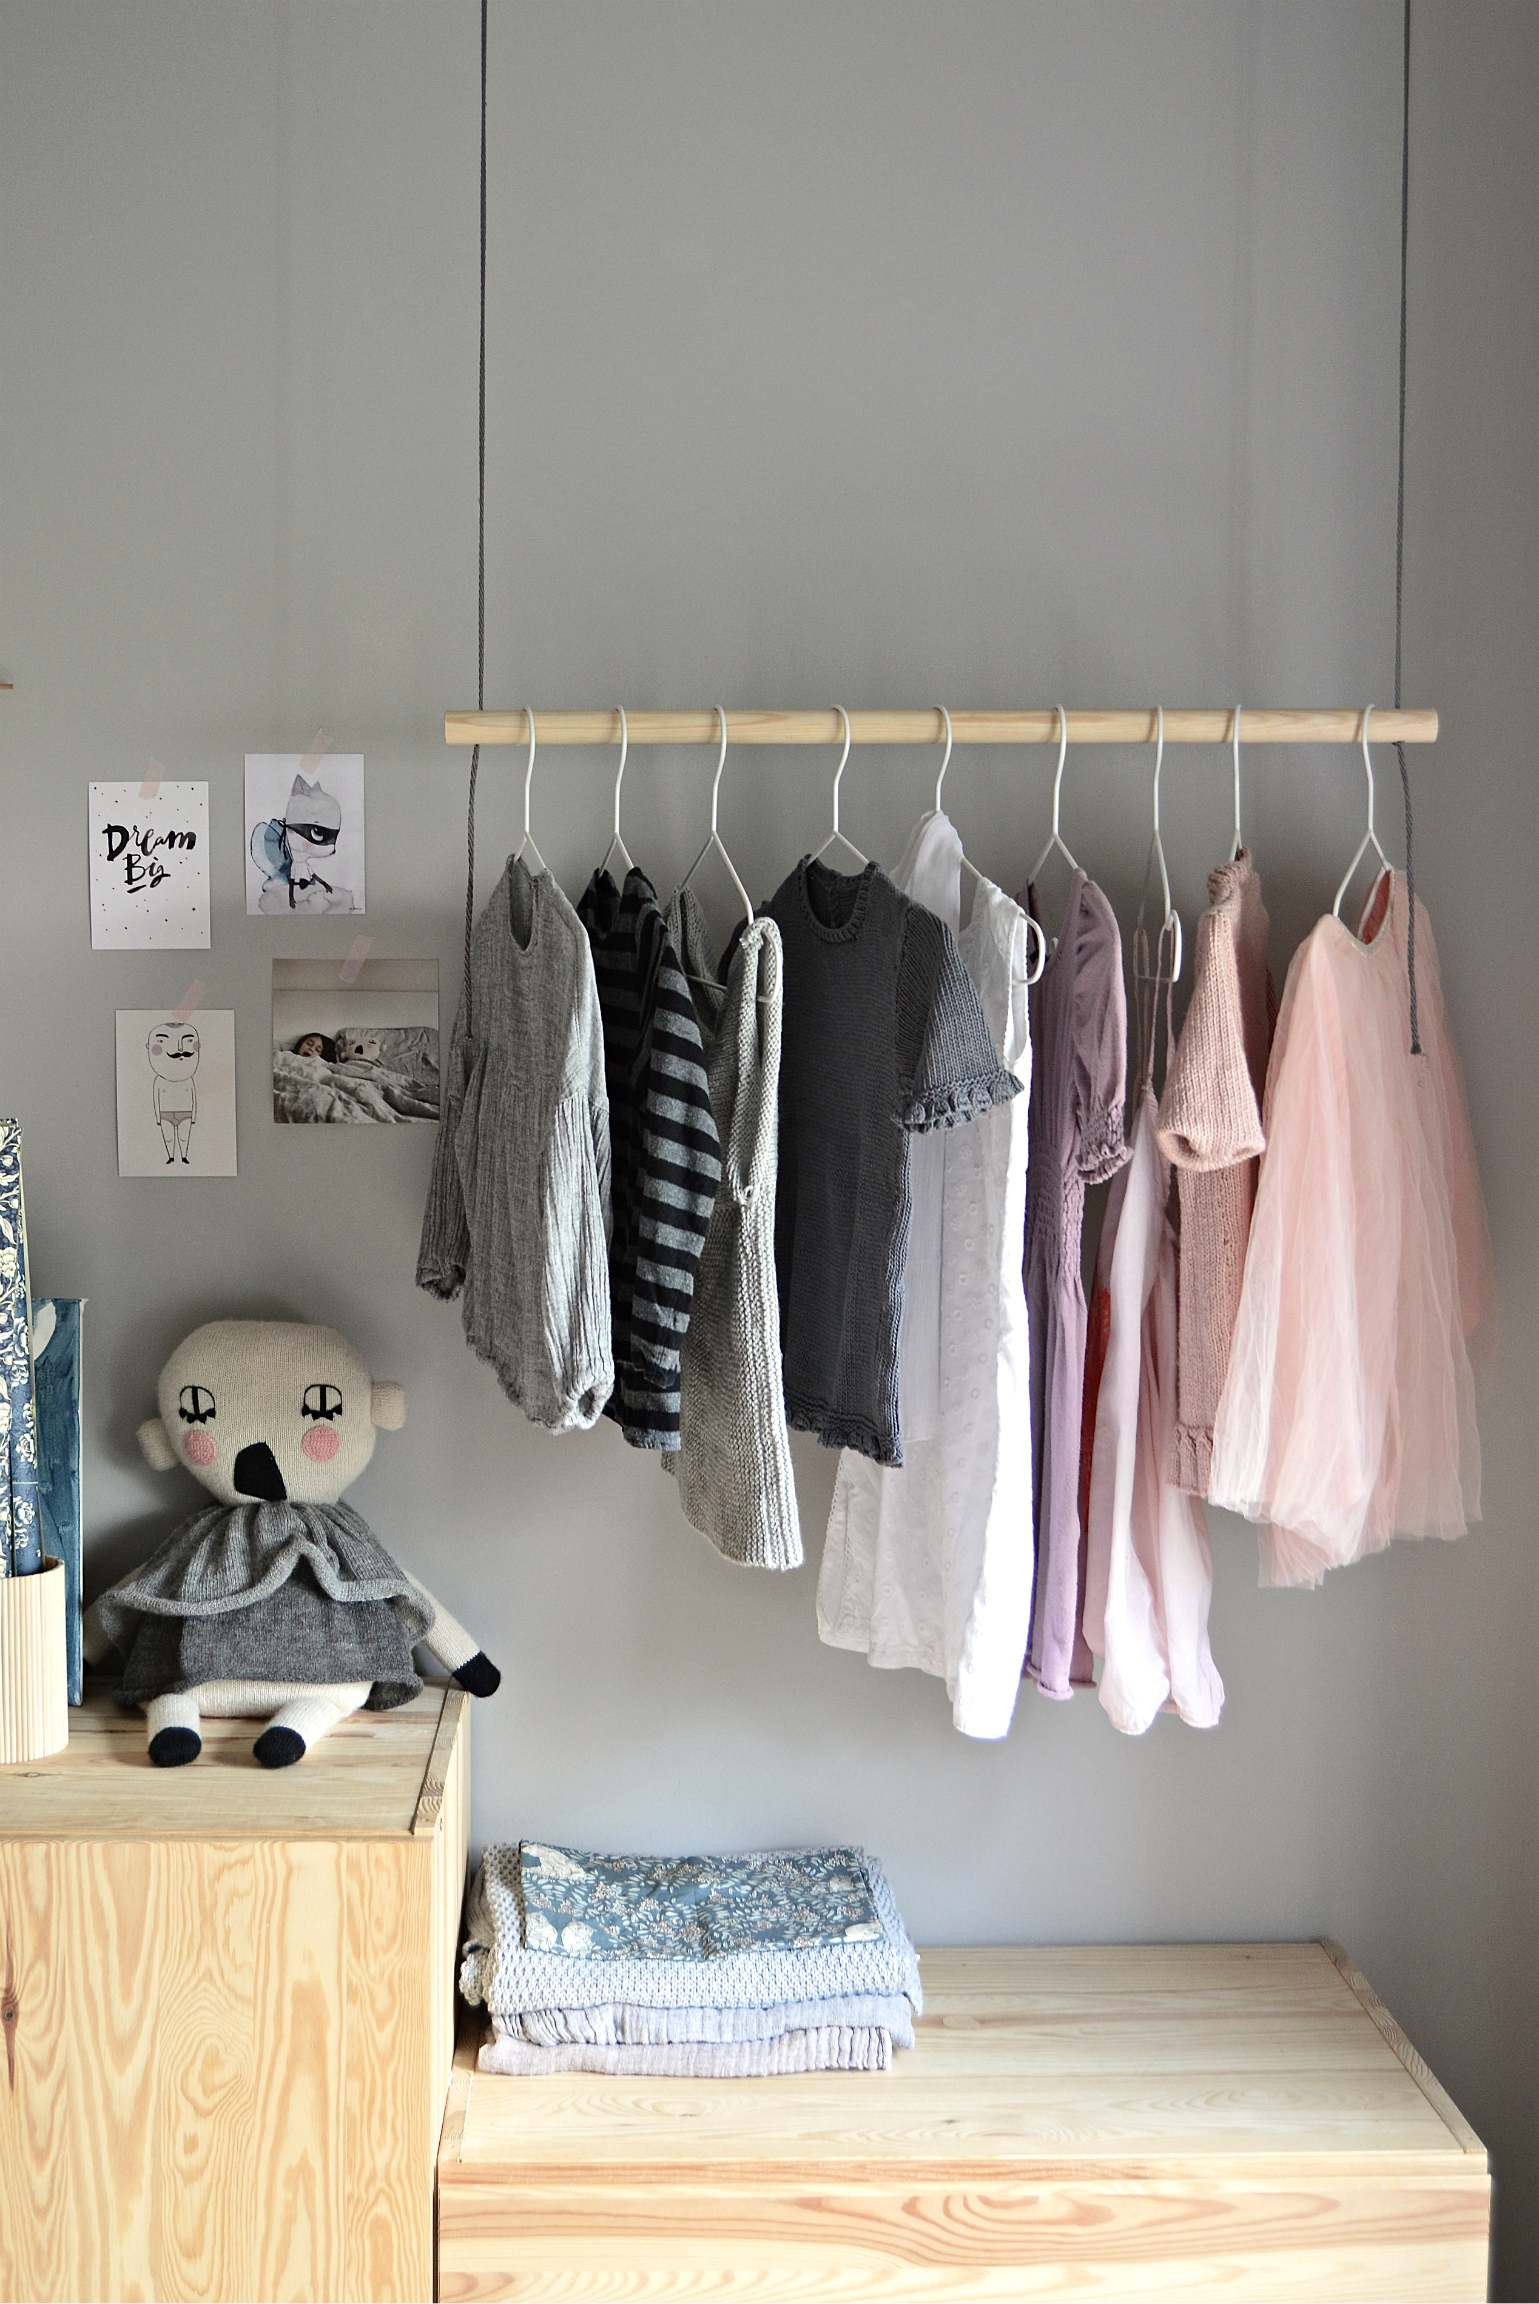 DIY Clothes Rack
 Hang on With this DIY hanging clothes rack DIY home